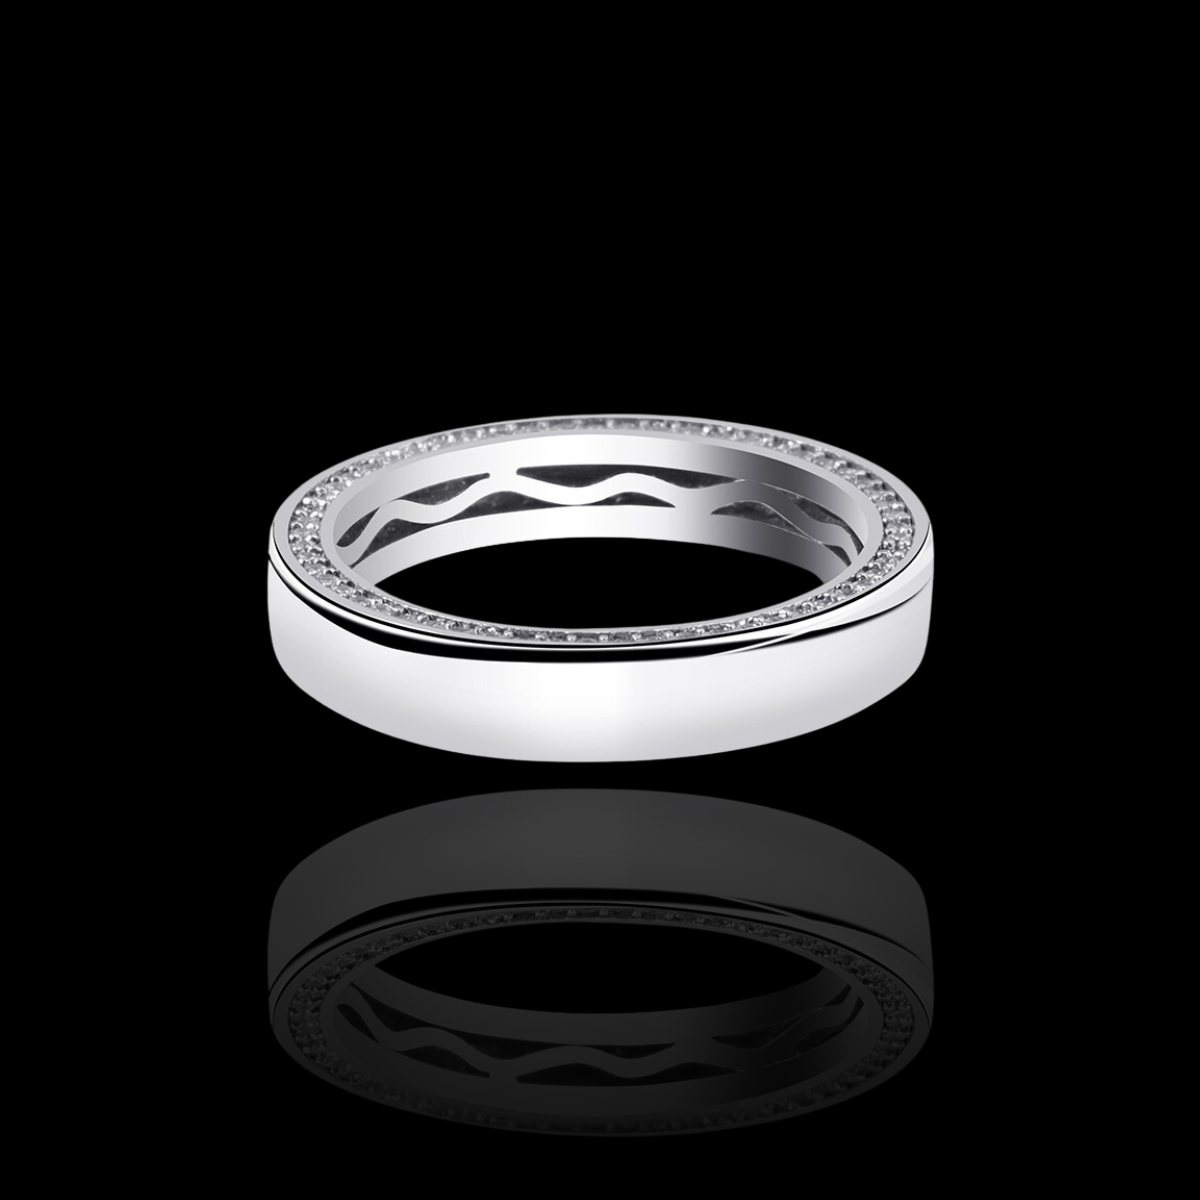 SOLID 925 STERLING SILVER RING